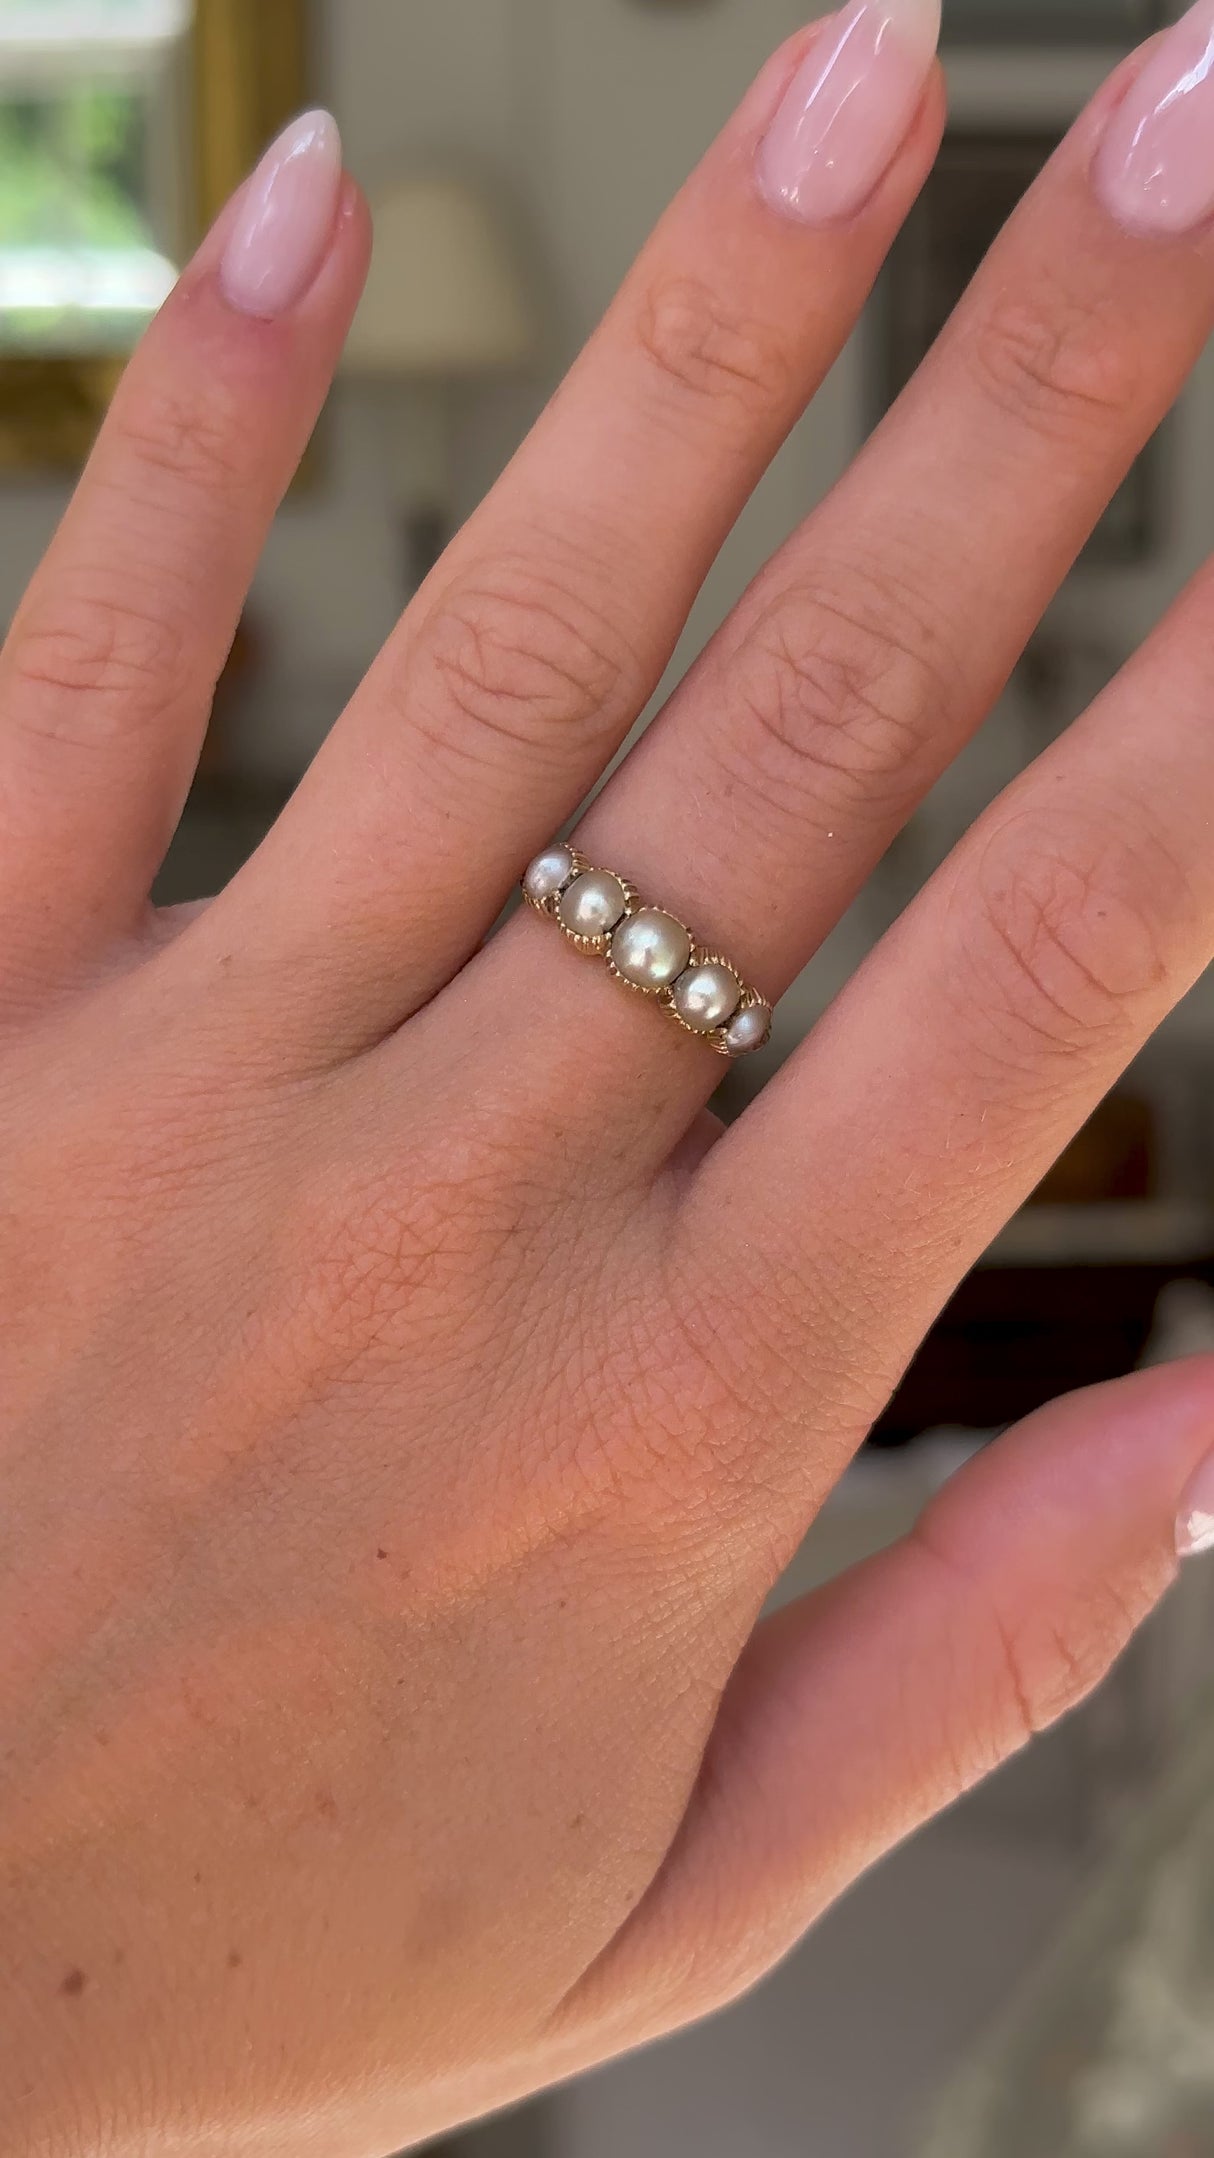 antique georgian pearl half hoop ring worn on hand and moved away from lens to give perspective, front view.